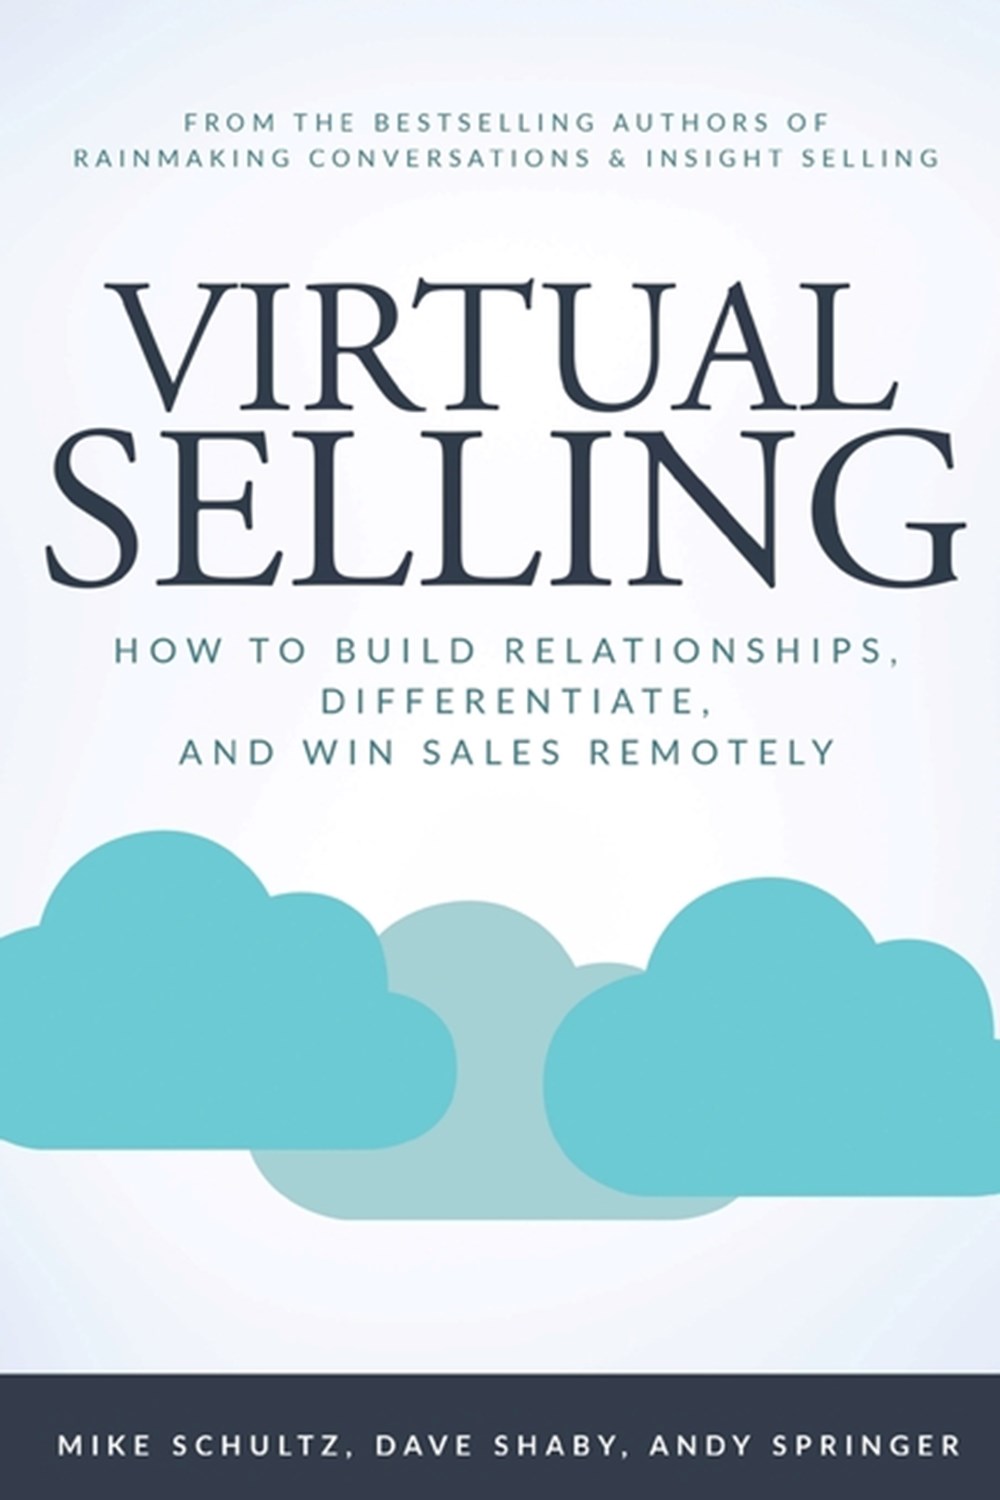 Virtual Selling How to Build Relationships, Differentiate, and Win Sales Remotely